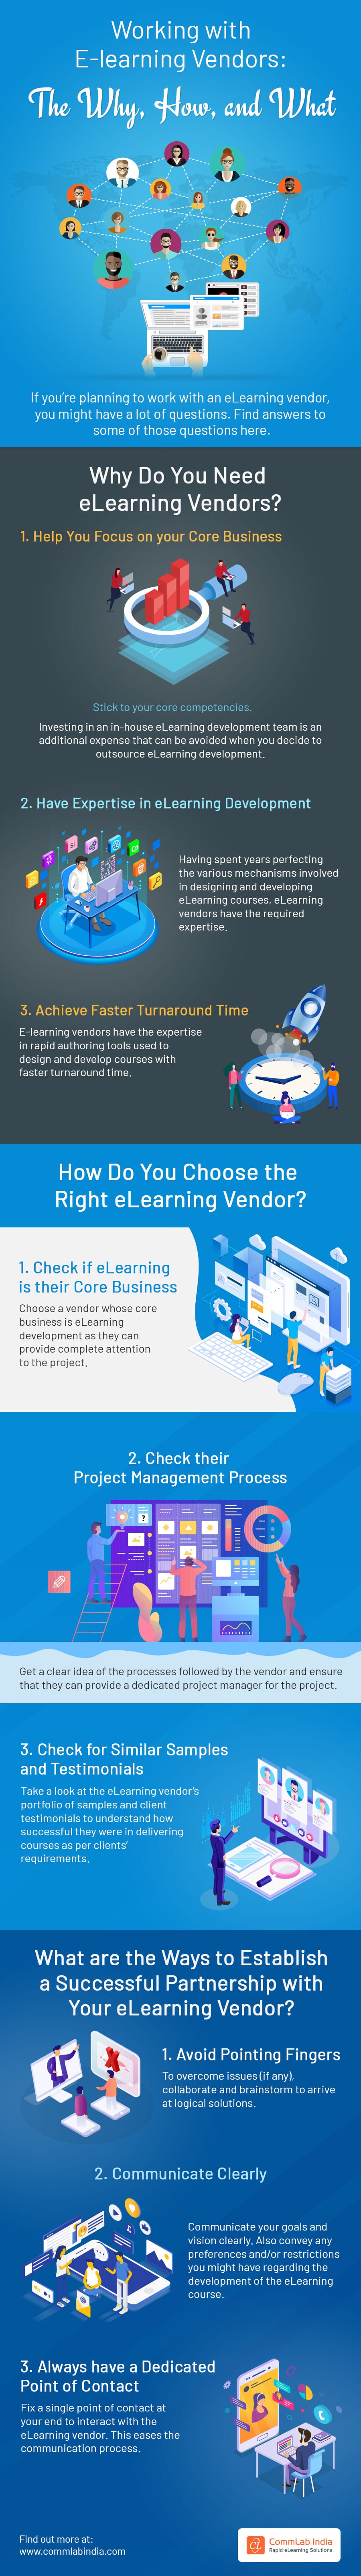 Working with E-learning Vendors: The Why, How, and What [Infographic]